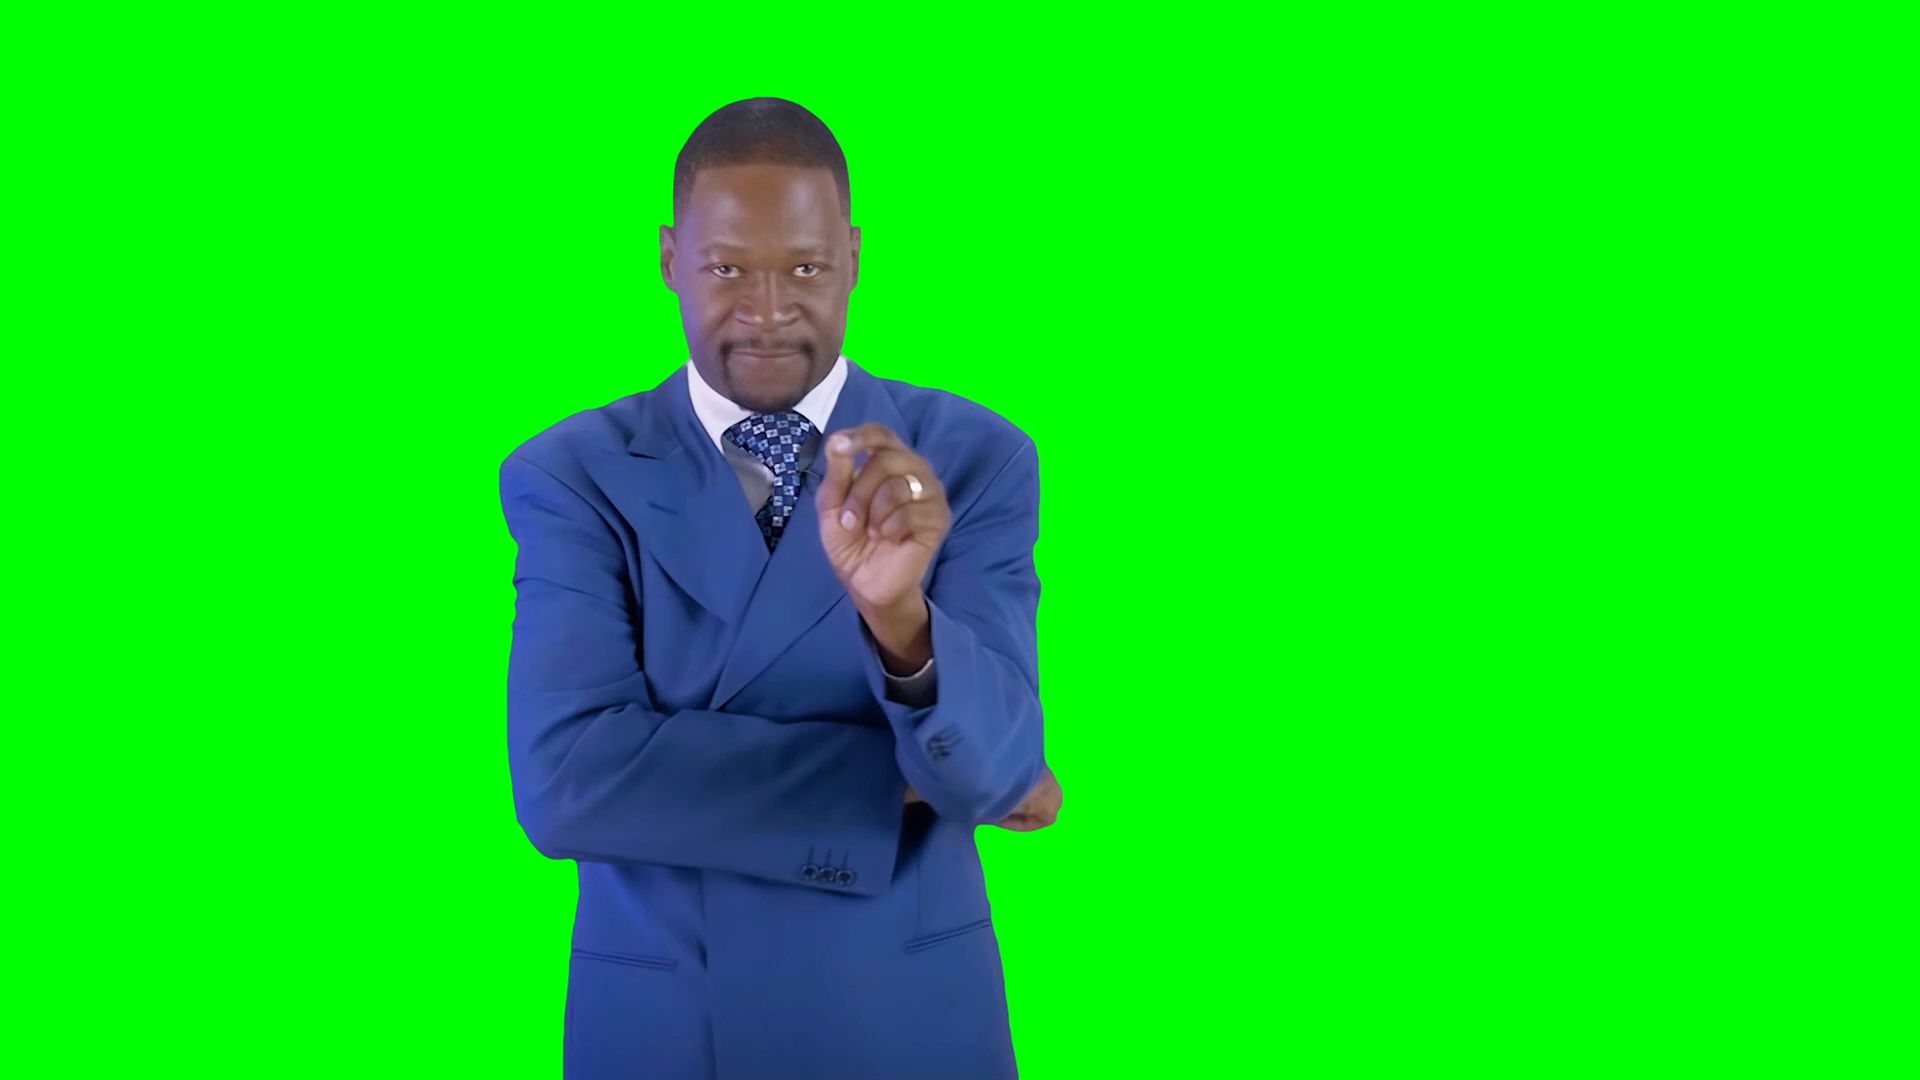 You get to Heaven and you don't find me there, you've gone to Hell meme (Green Screen)